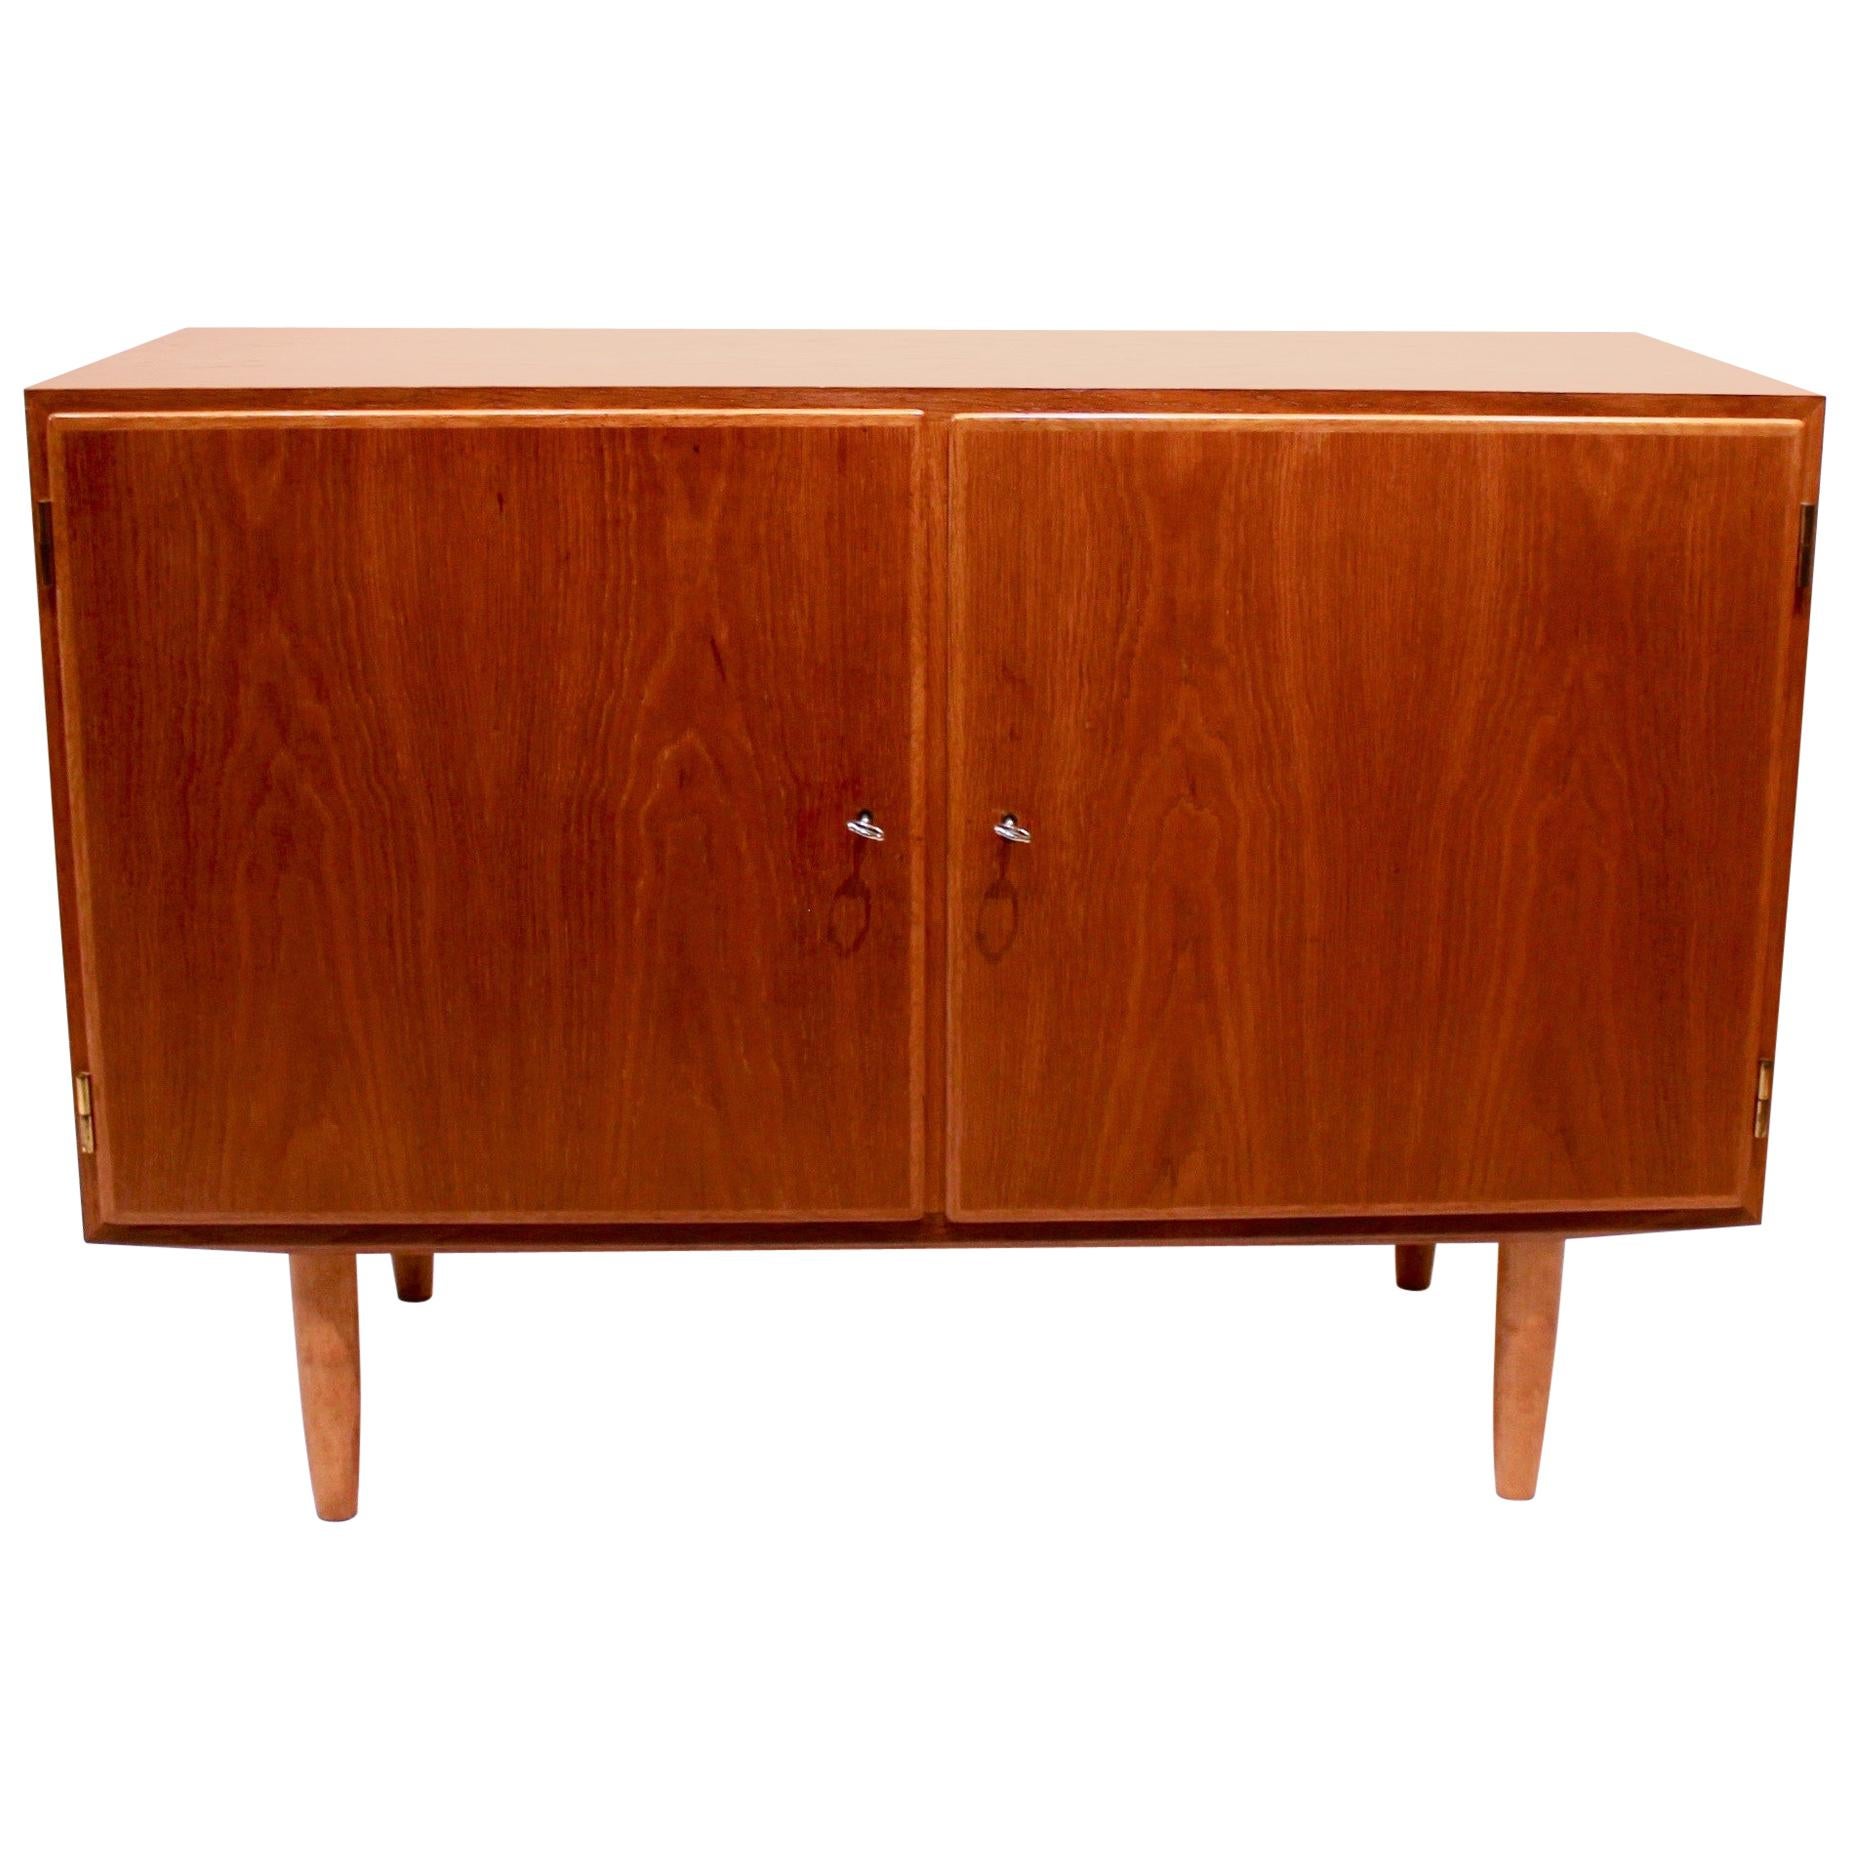 Sideboard of Oak with Two Doors of Danish Design from the 1960s